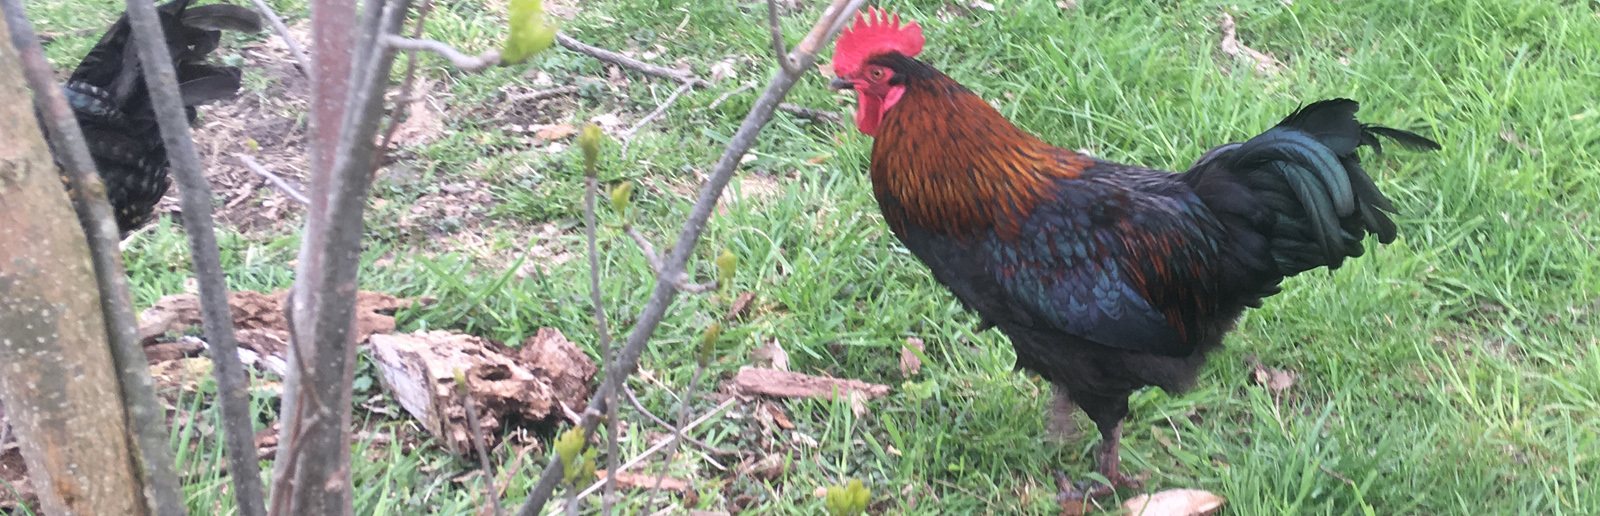 Pet backyard chickens for sale in Ontario